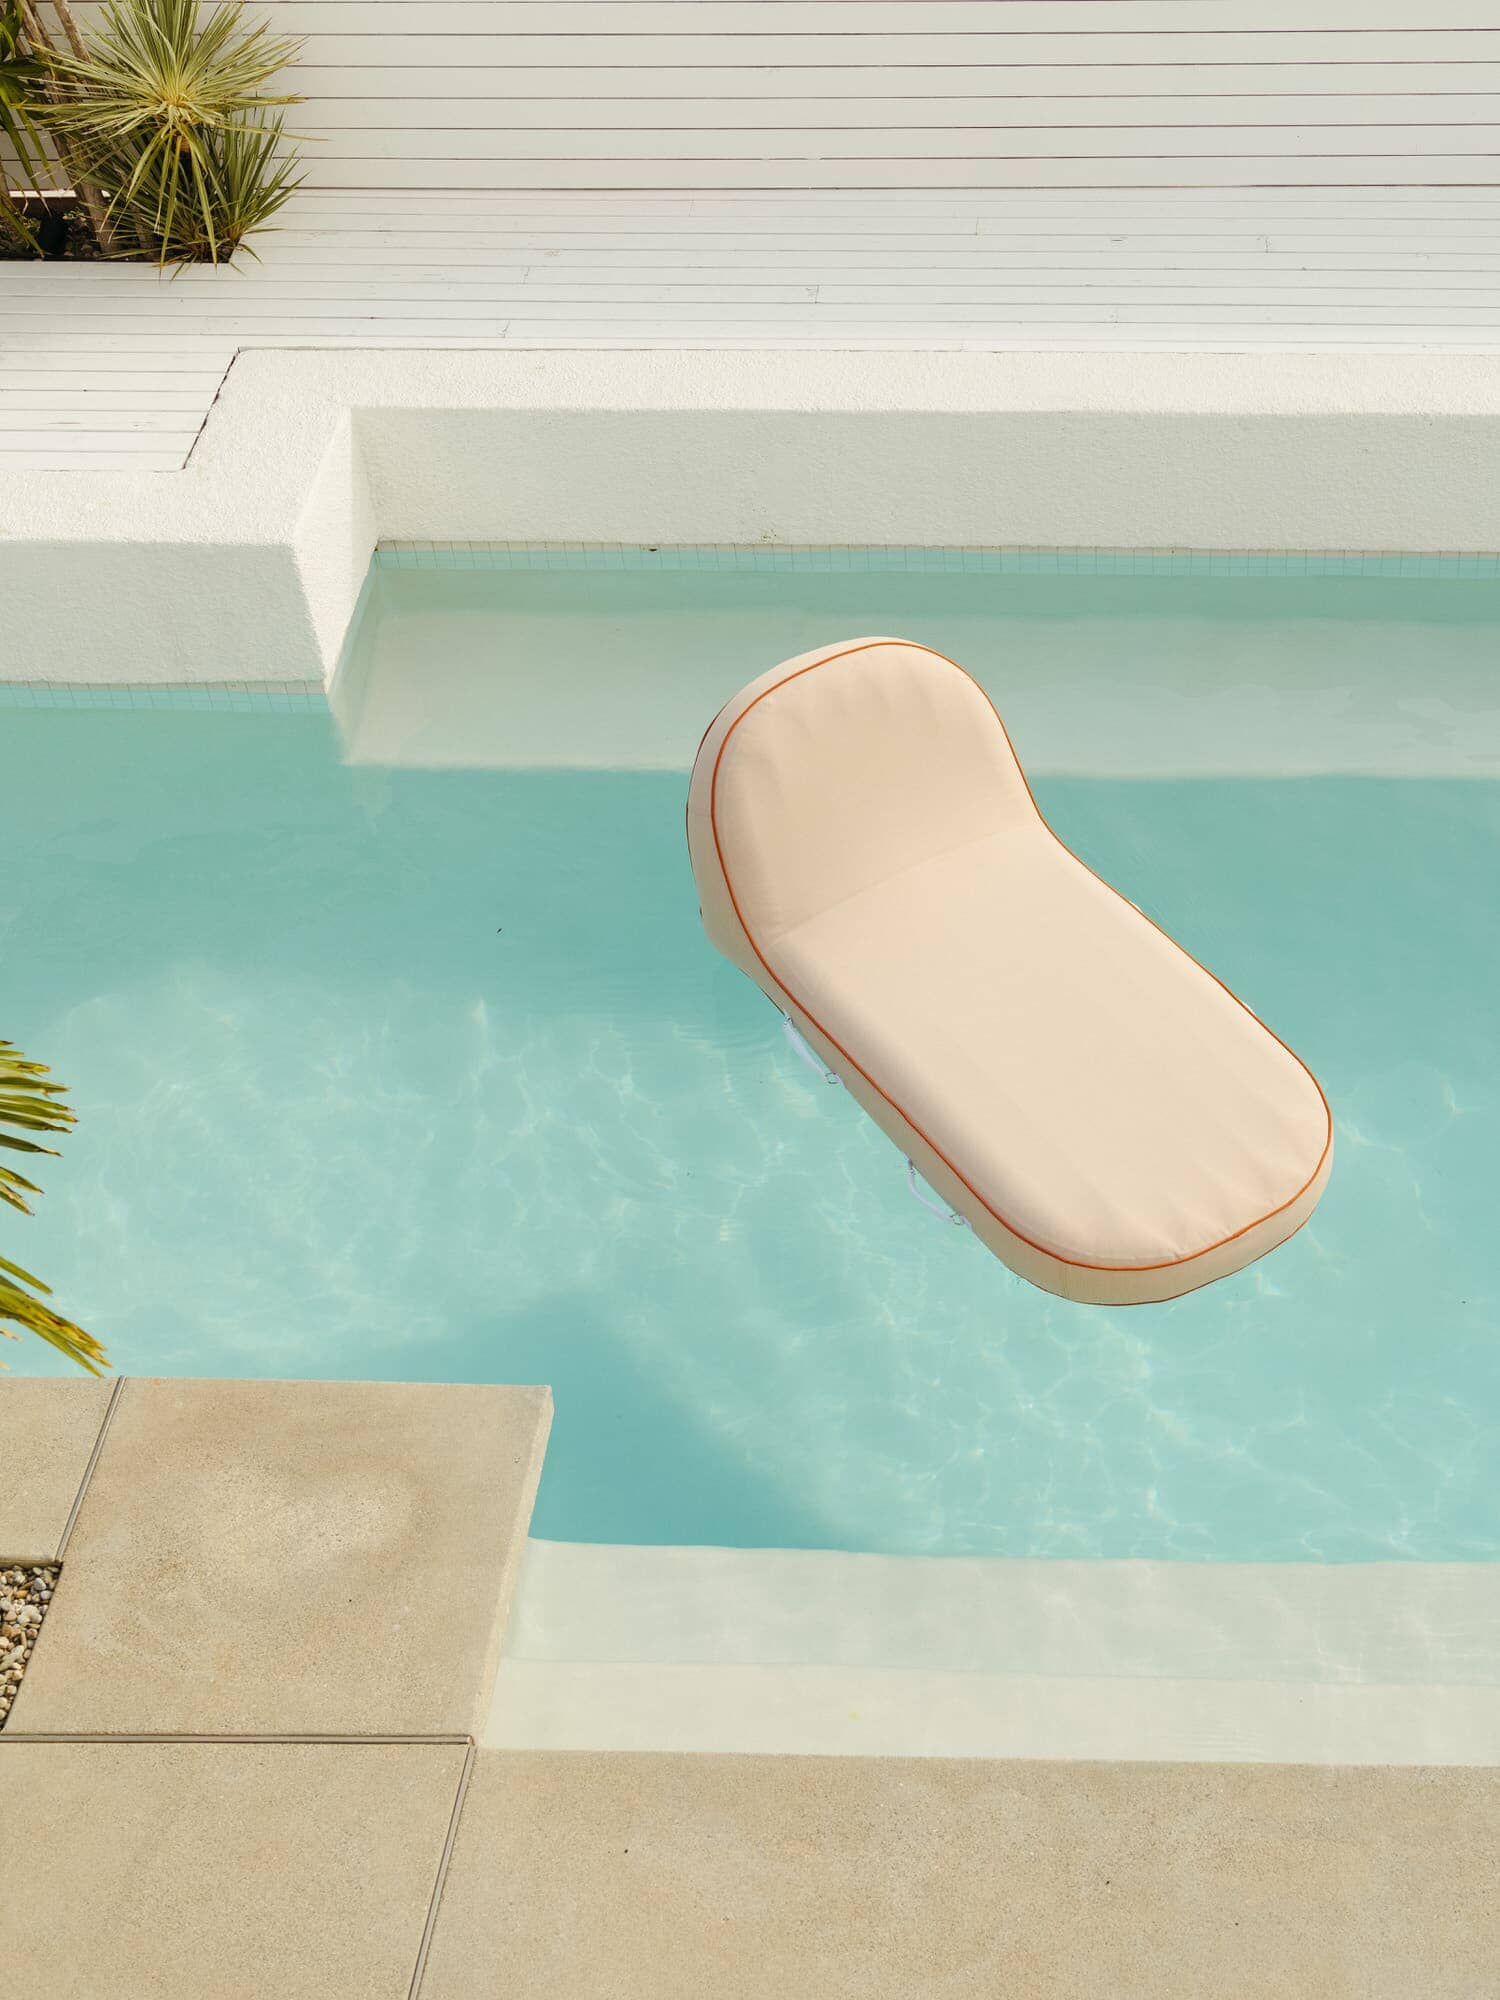 Riviera pink pool lounger in the pool